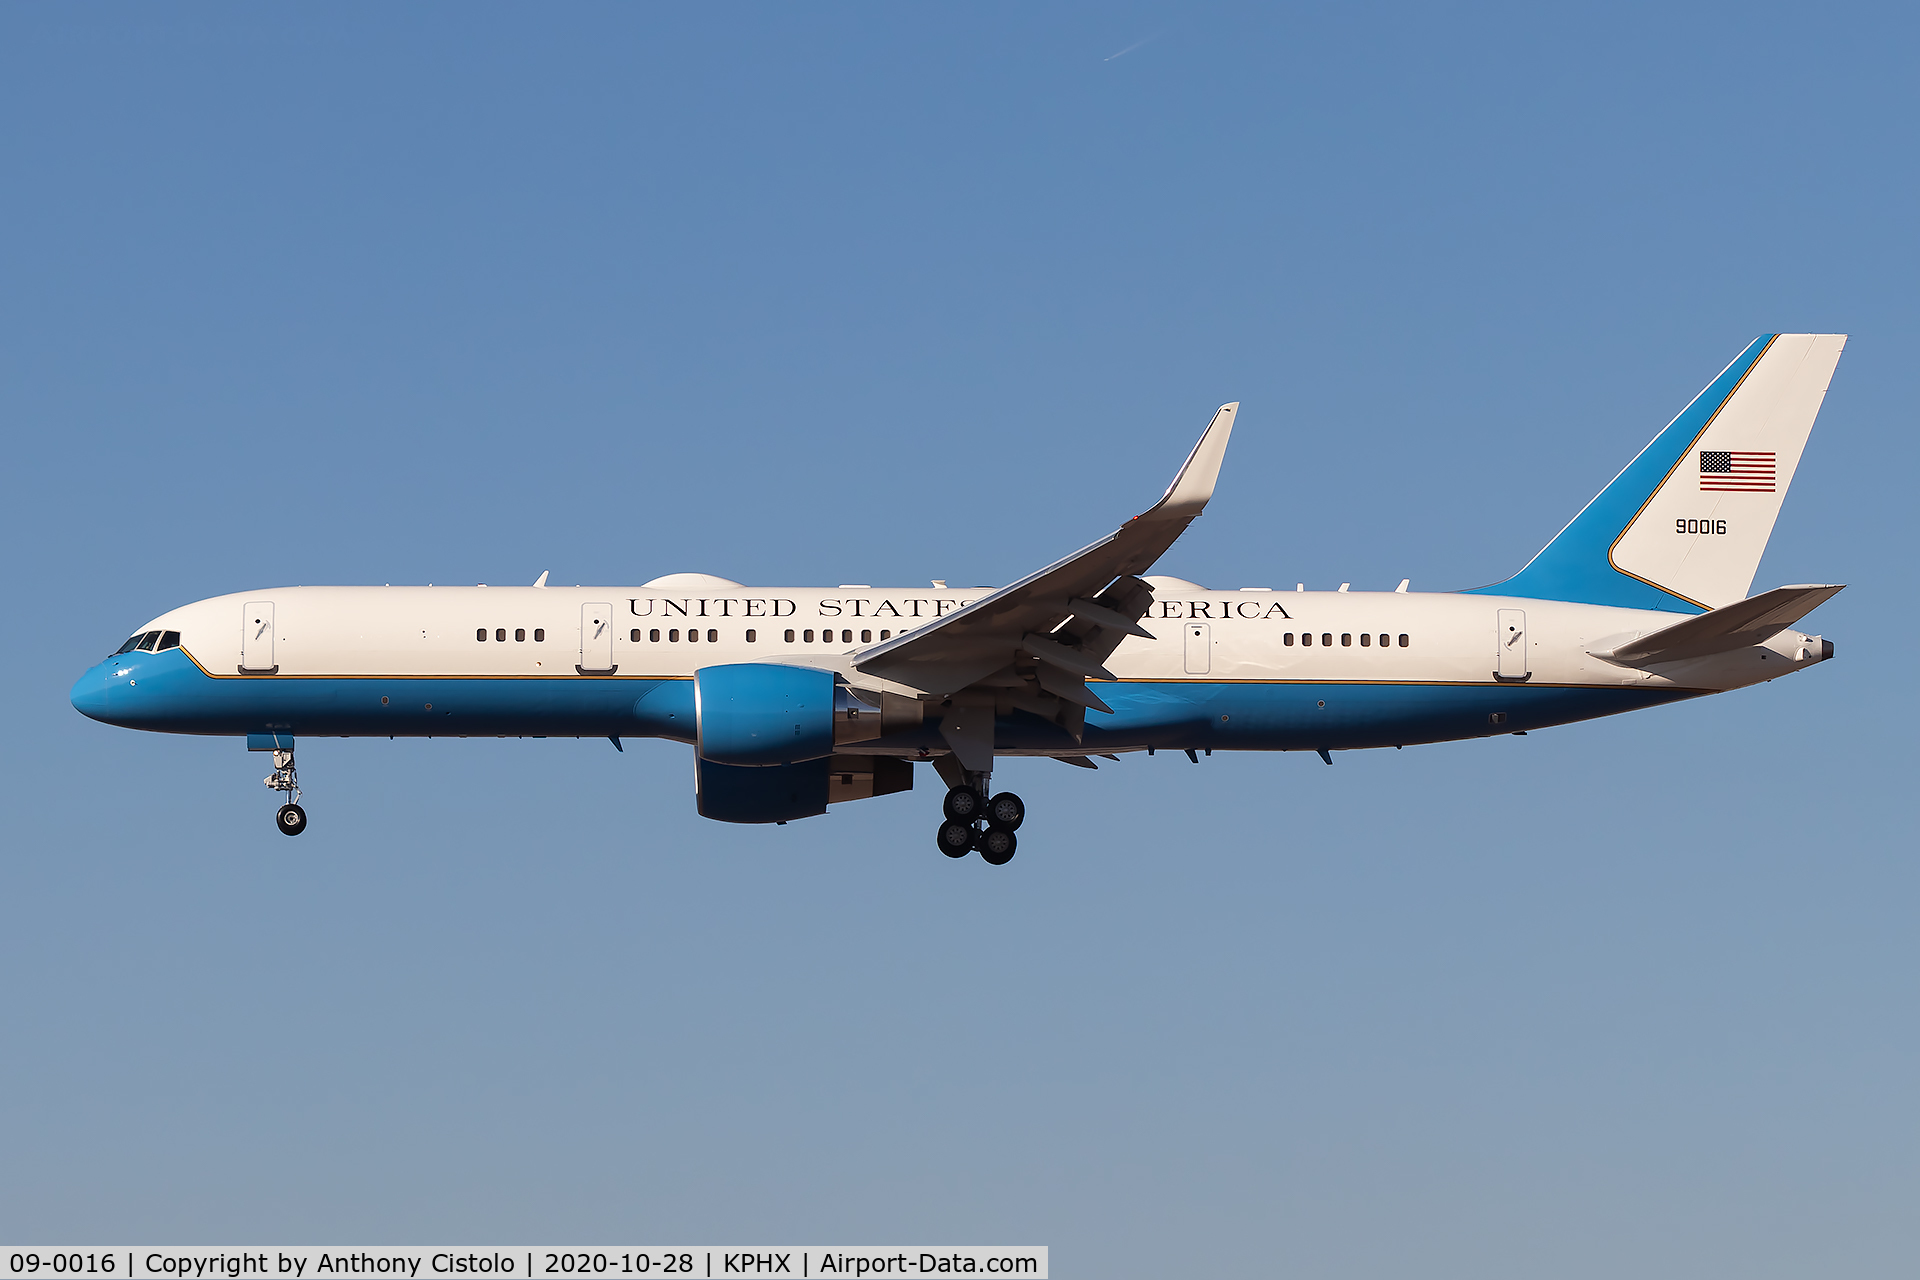 09-0016, 1996 Boeing 757-2Q8 C/N 28160, 09-0016 on final for runway 25L at KPHX, supporting POTUS.